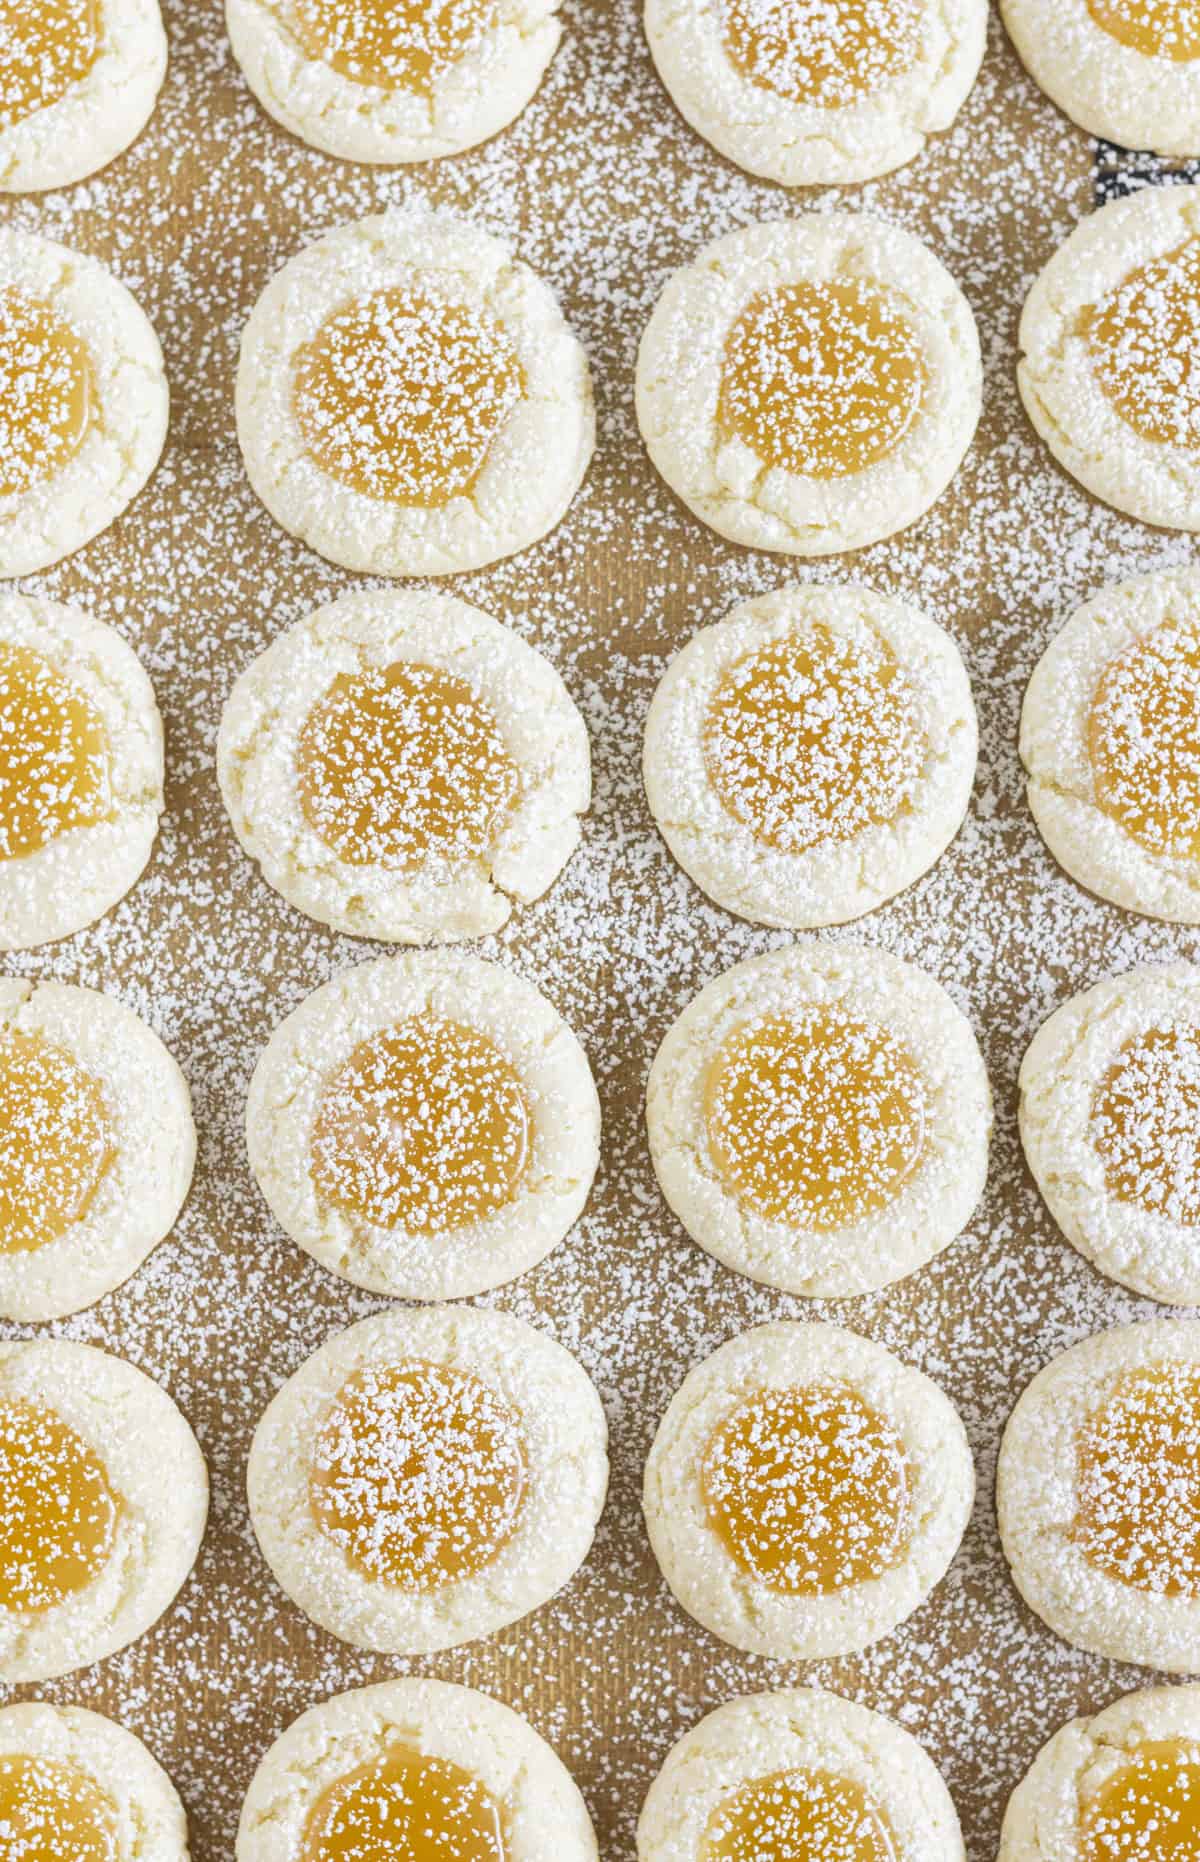 Lemon curd cookies on a sheet pan and sprinkled with powdered sugar.